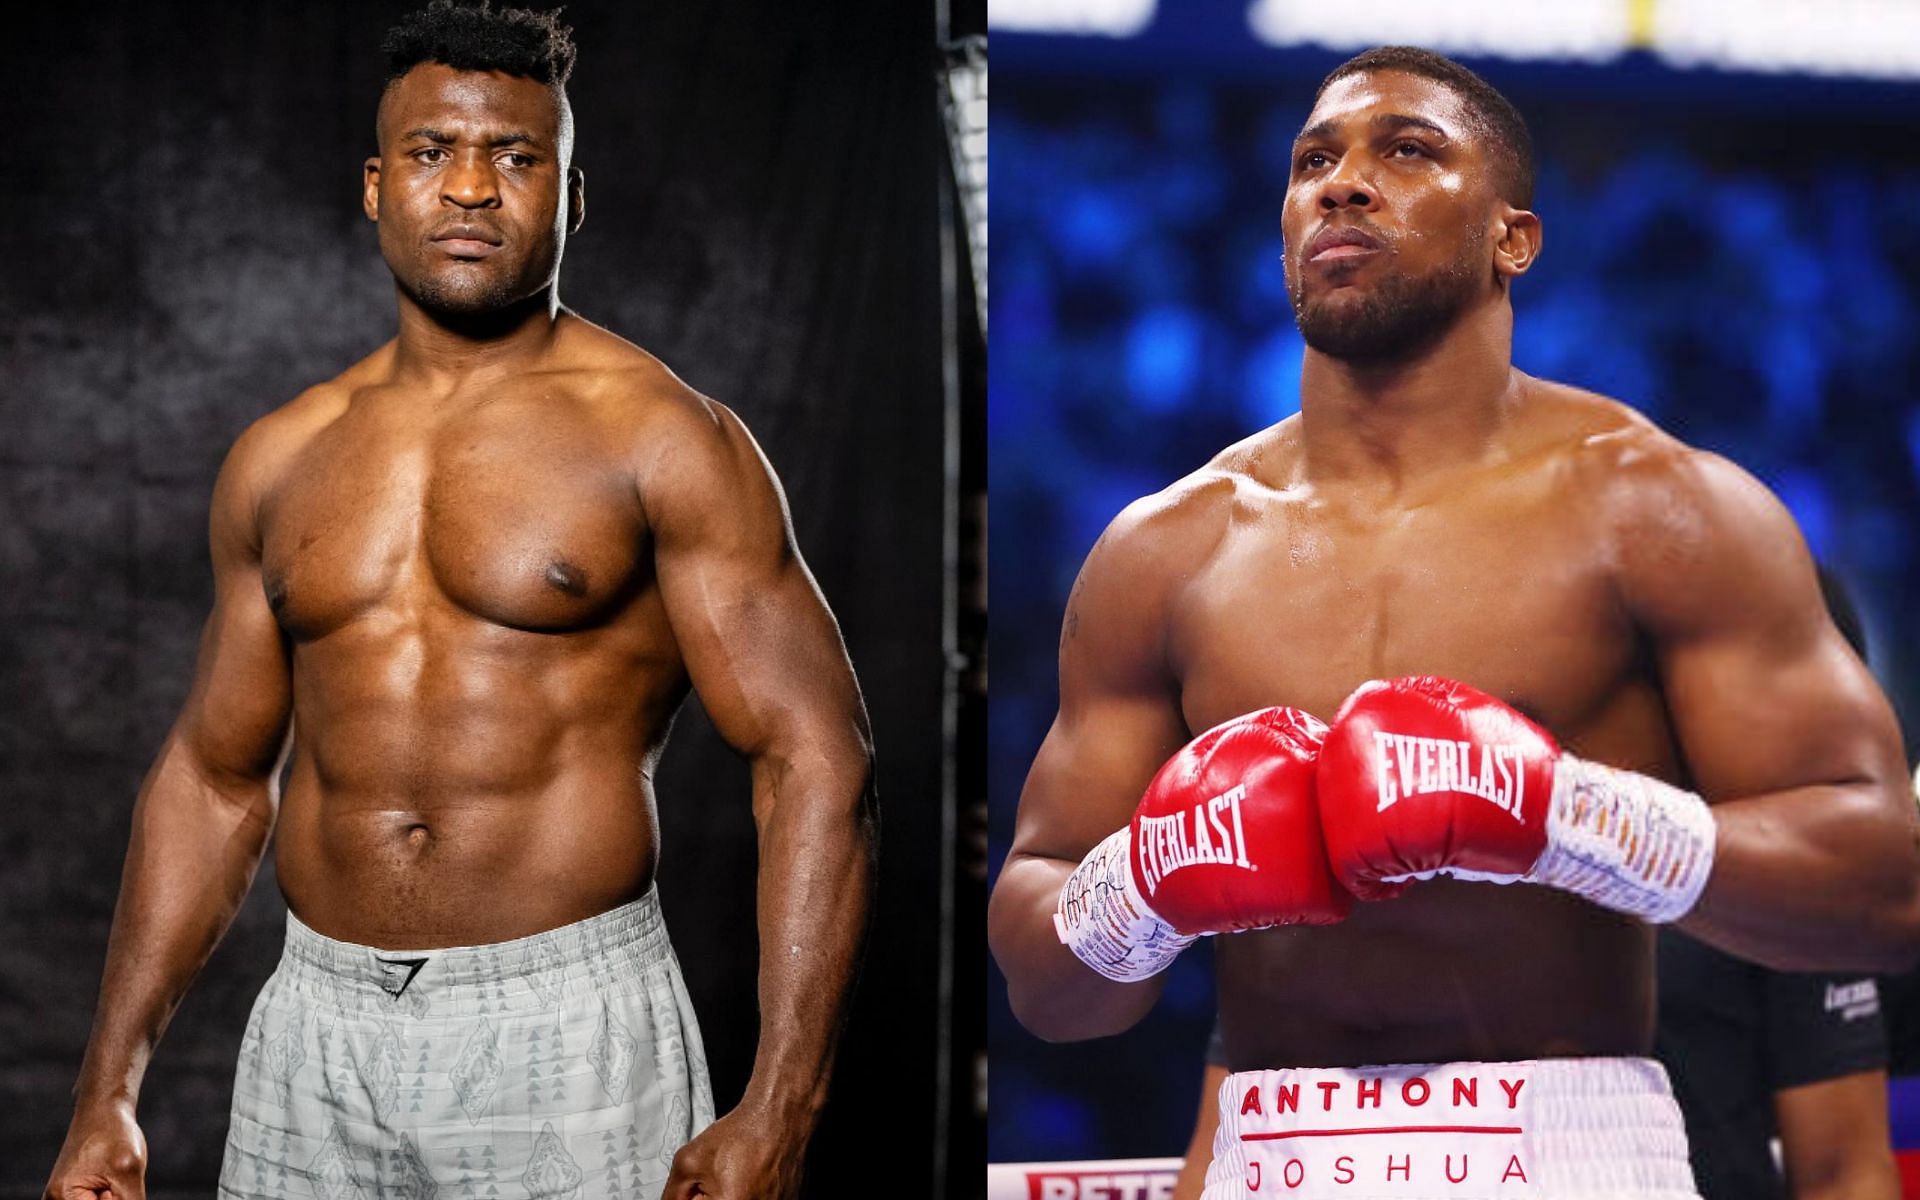 Francis Ngannou (left) and Anthony Joshua (right) [Images Courtesy: @GettyImages]